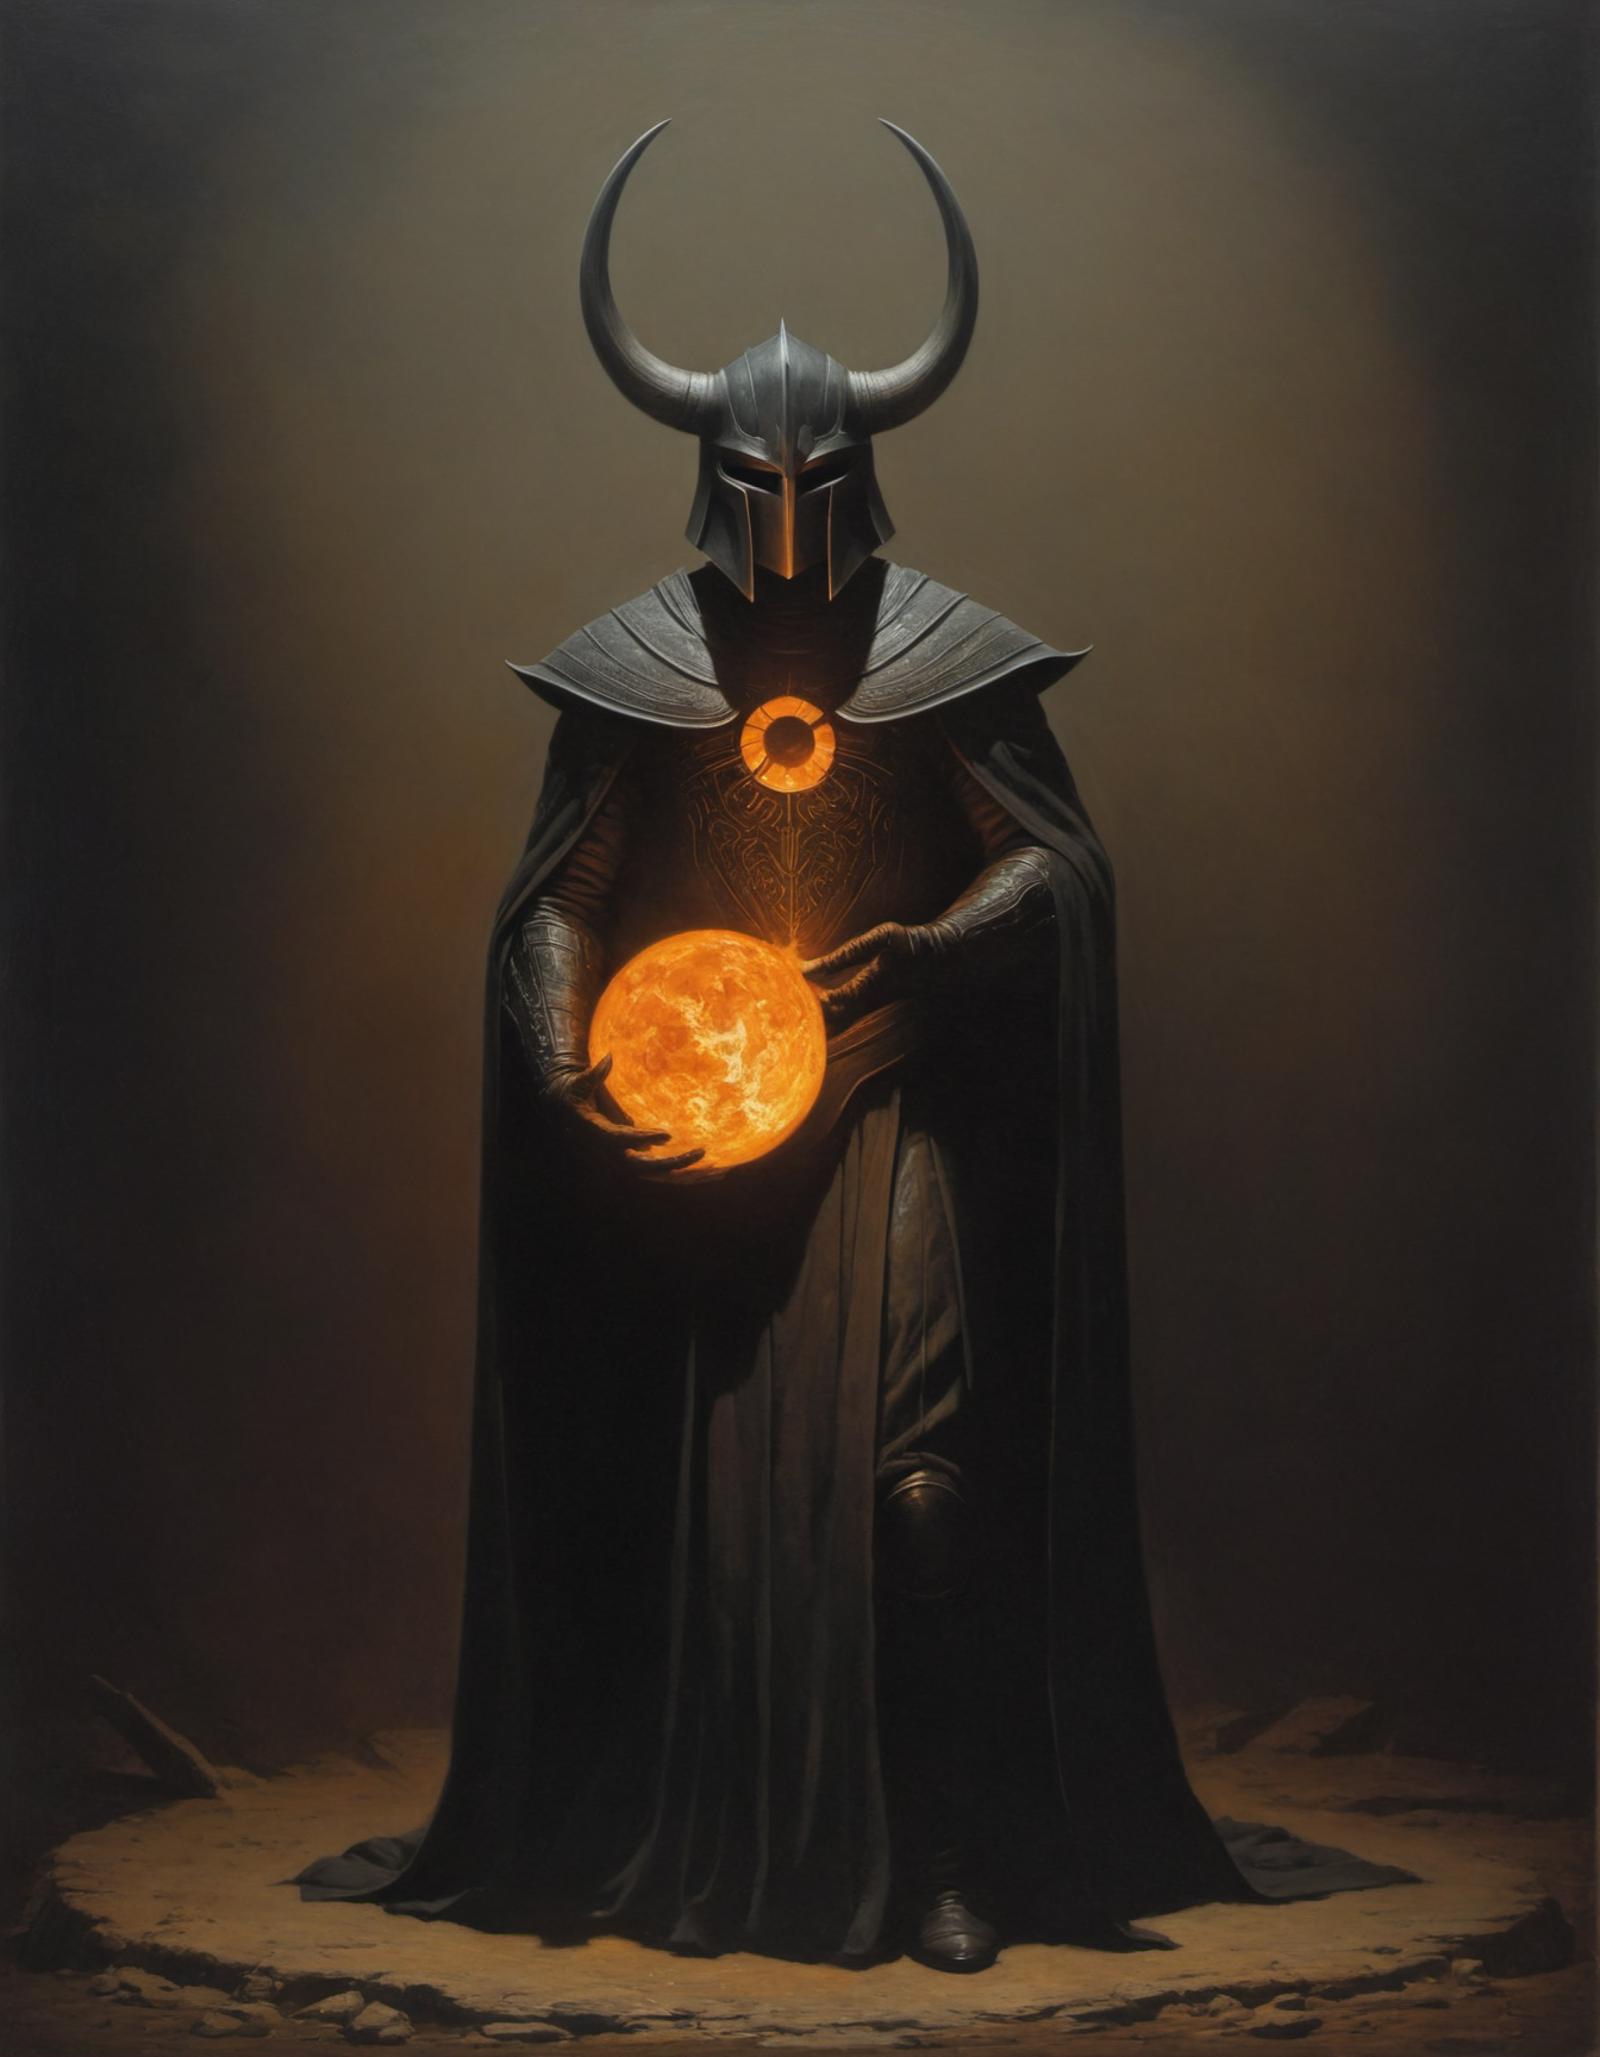 A dark fantasy painting of a warrior holding a glowing orb.